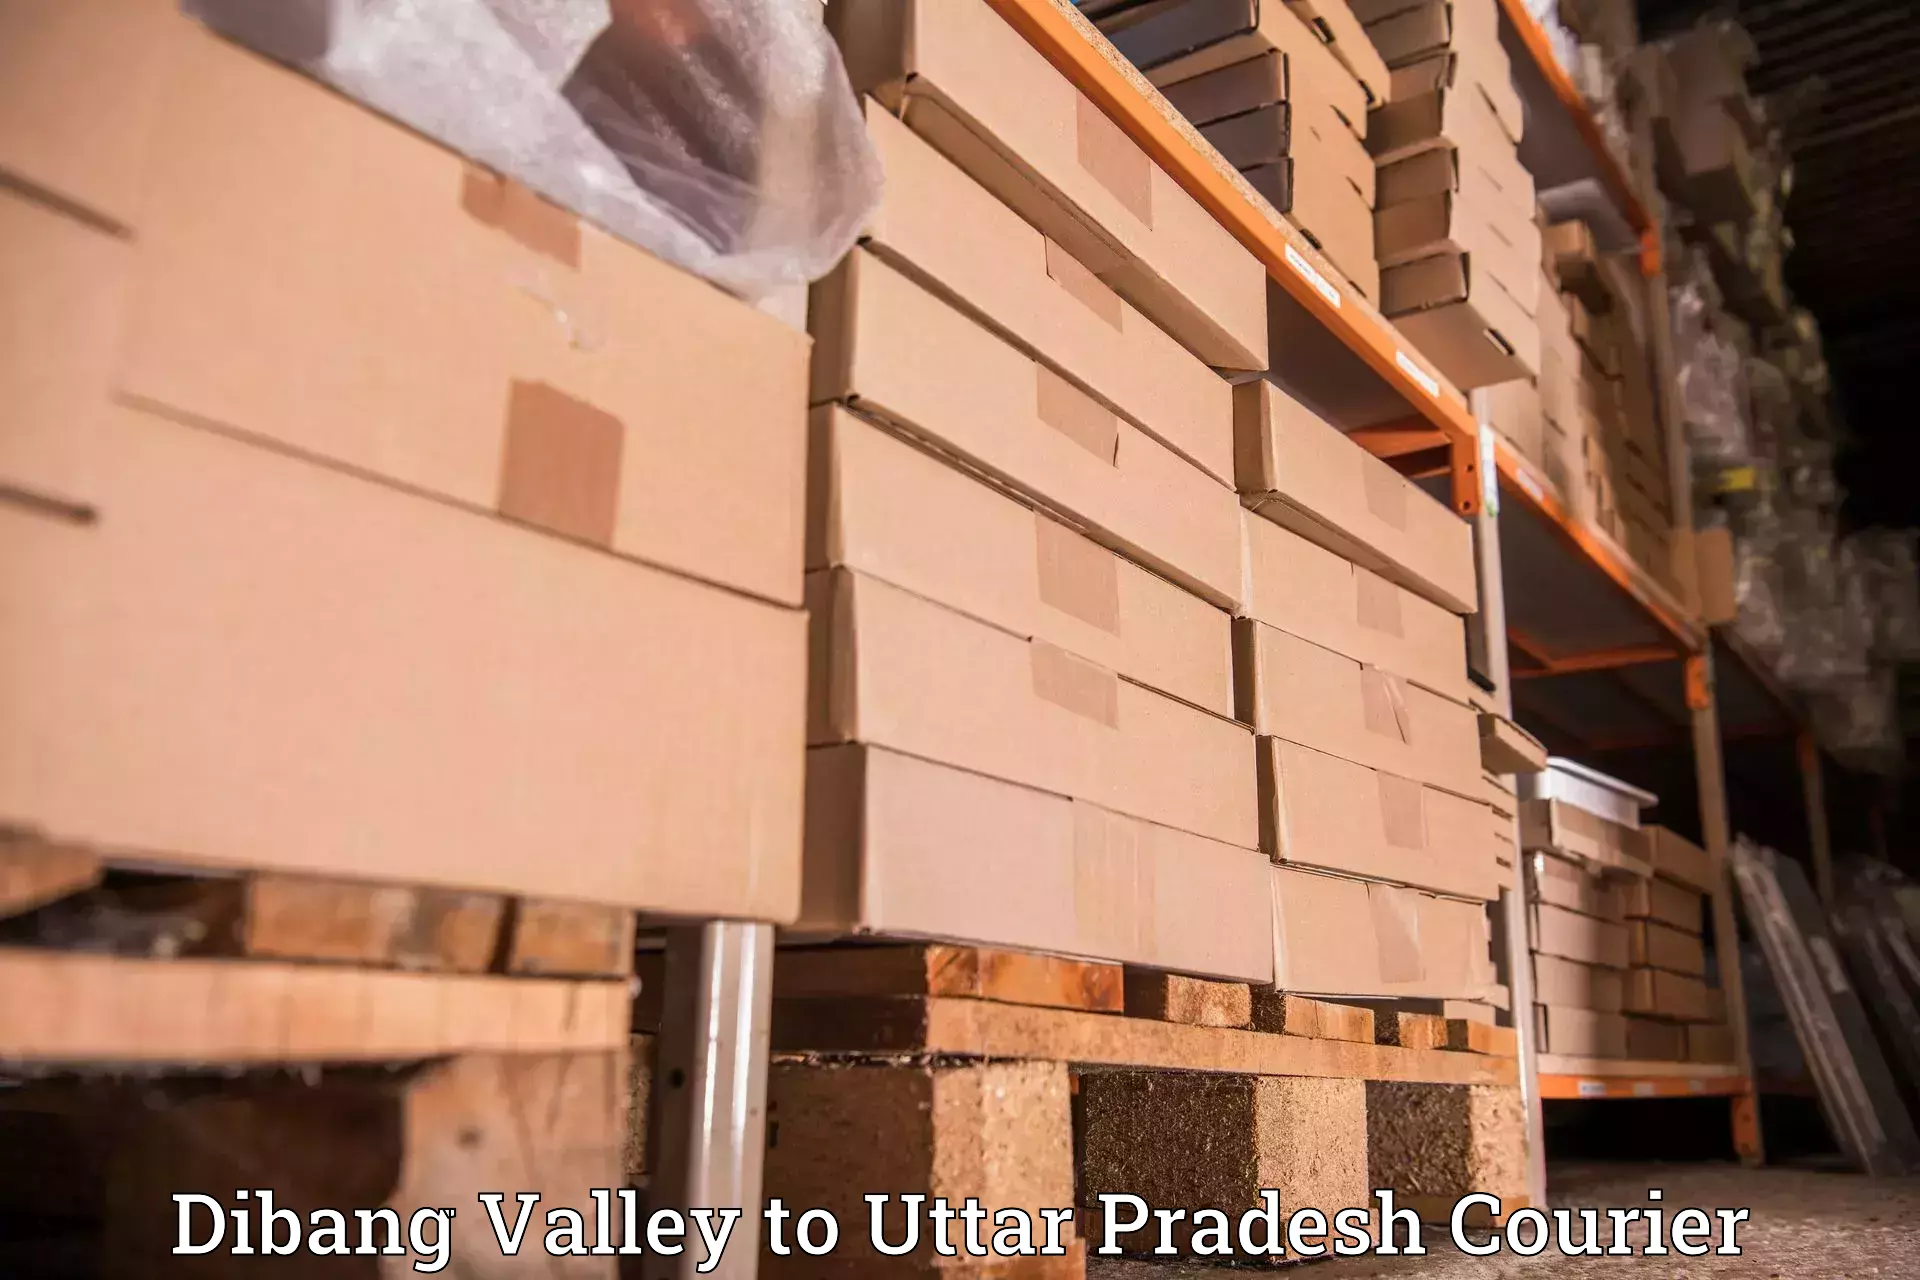 Courier services in Dibang Valley to Shahganj